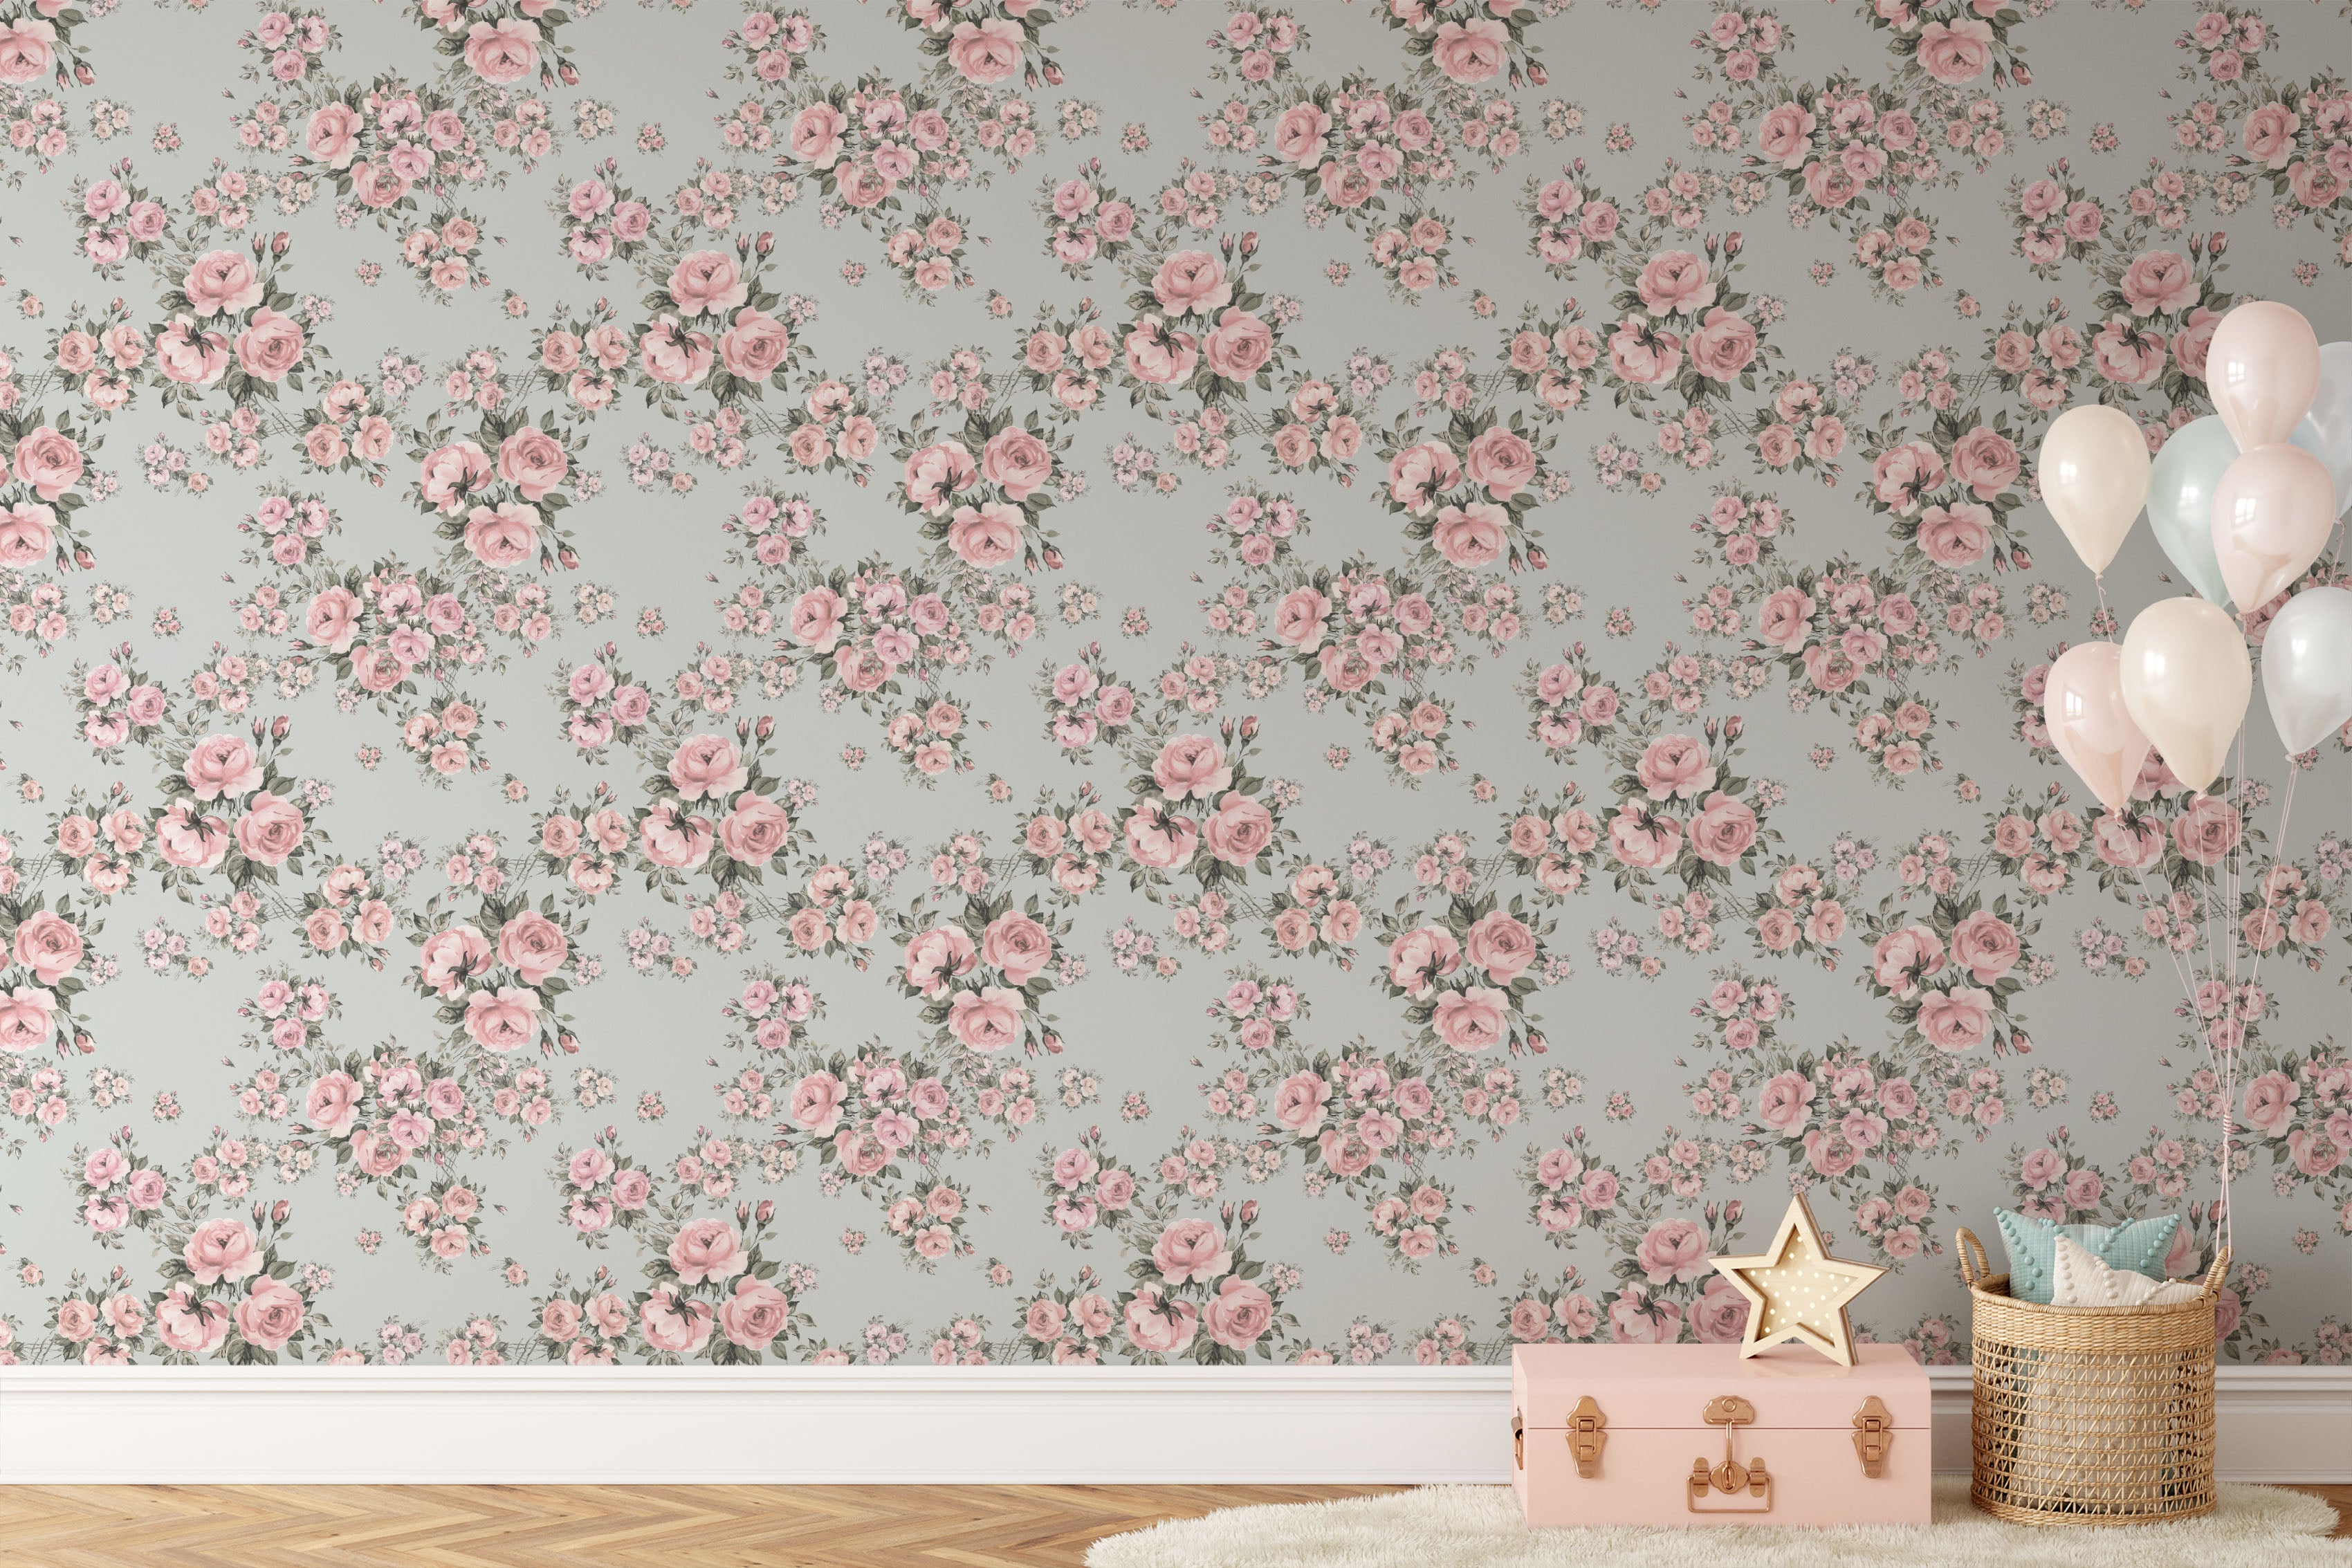 A stylish living area with Rose Bouquet Wallpaper II, featuring pink roses and green leaves on a light blue background. The decor includes a wicker basket, balloons, and a pink toy chest.